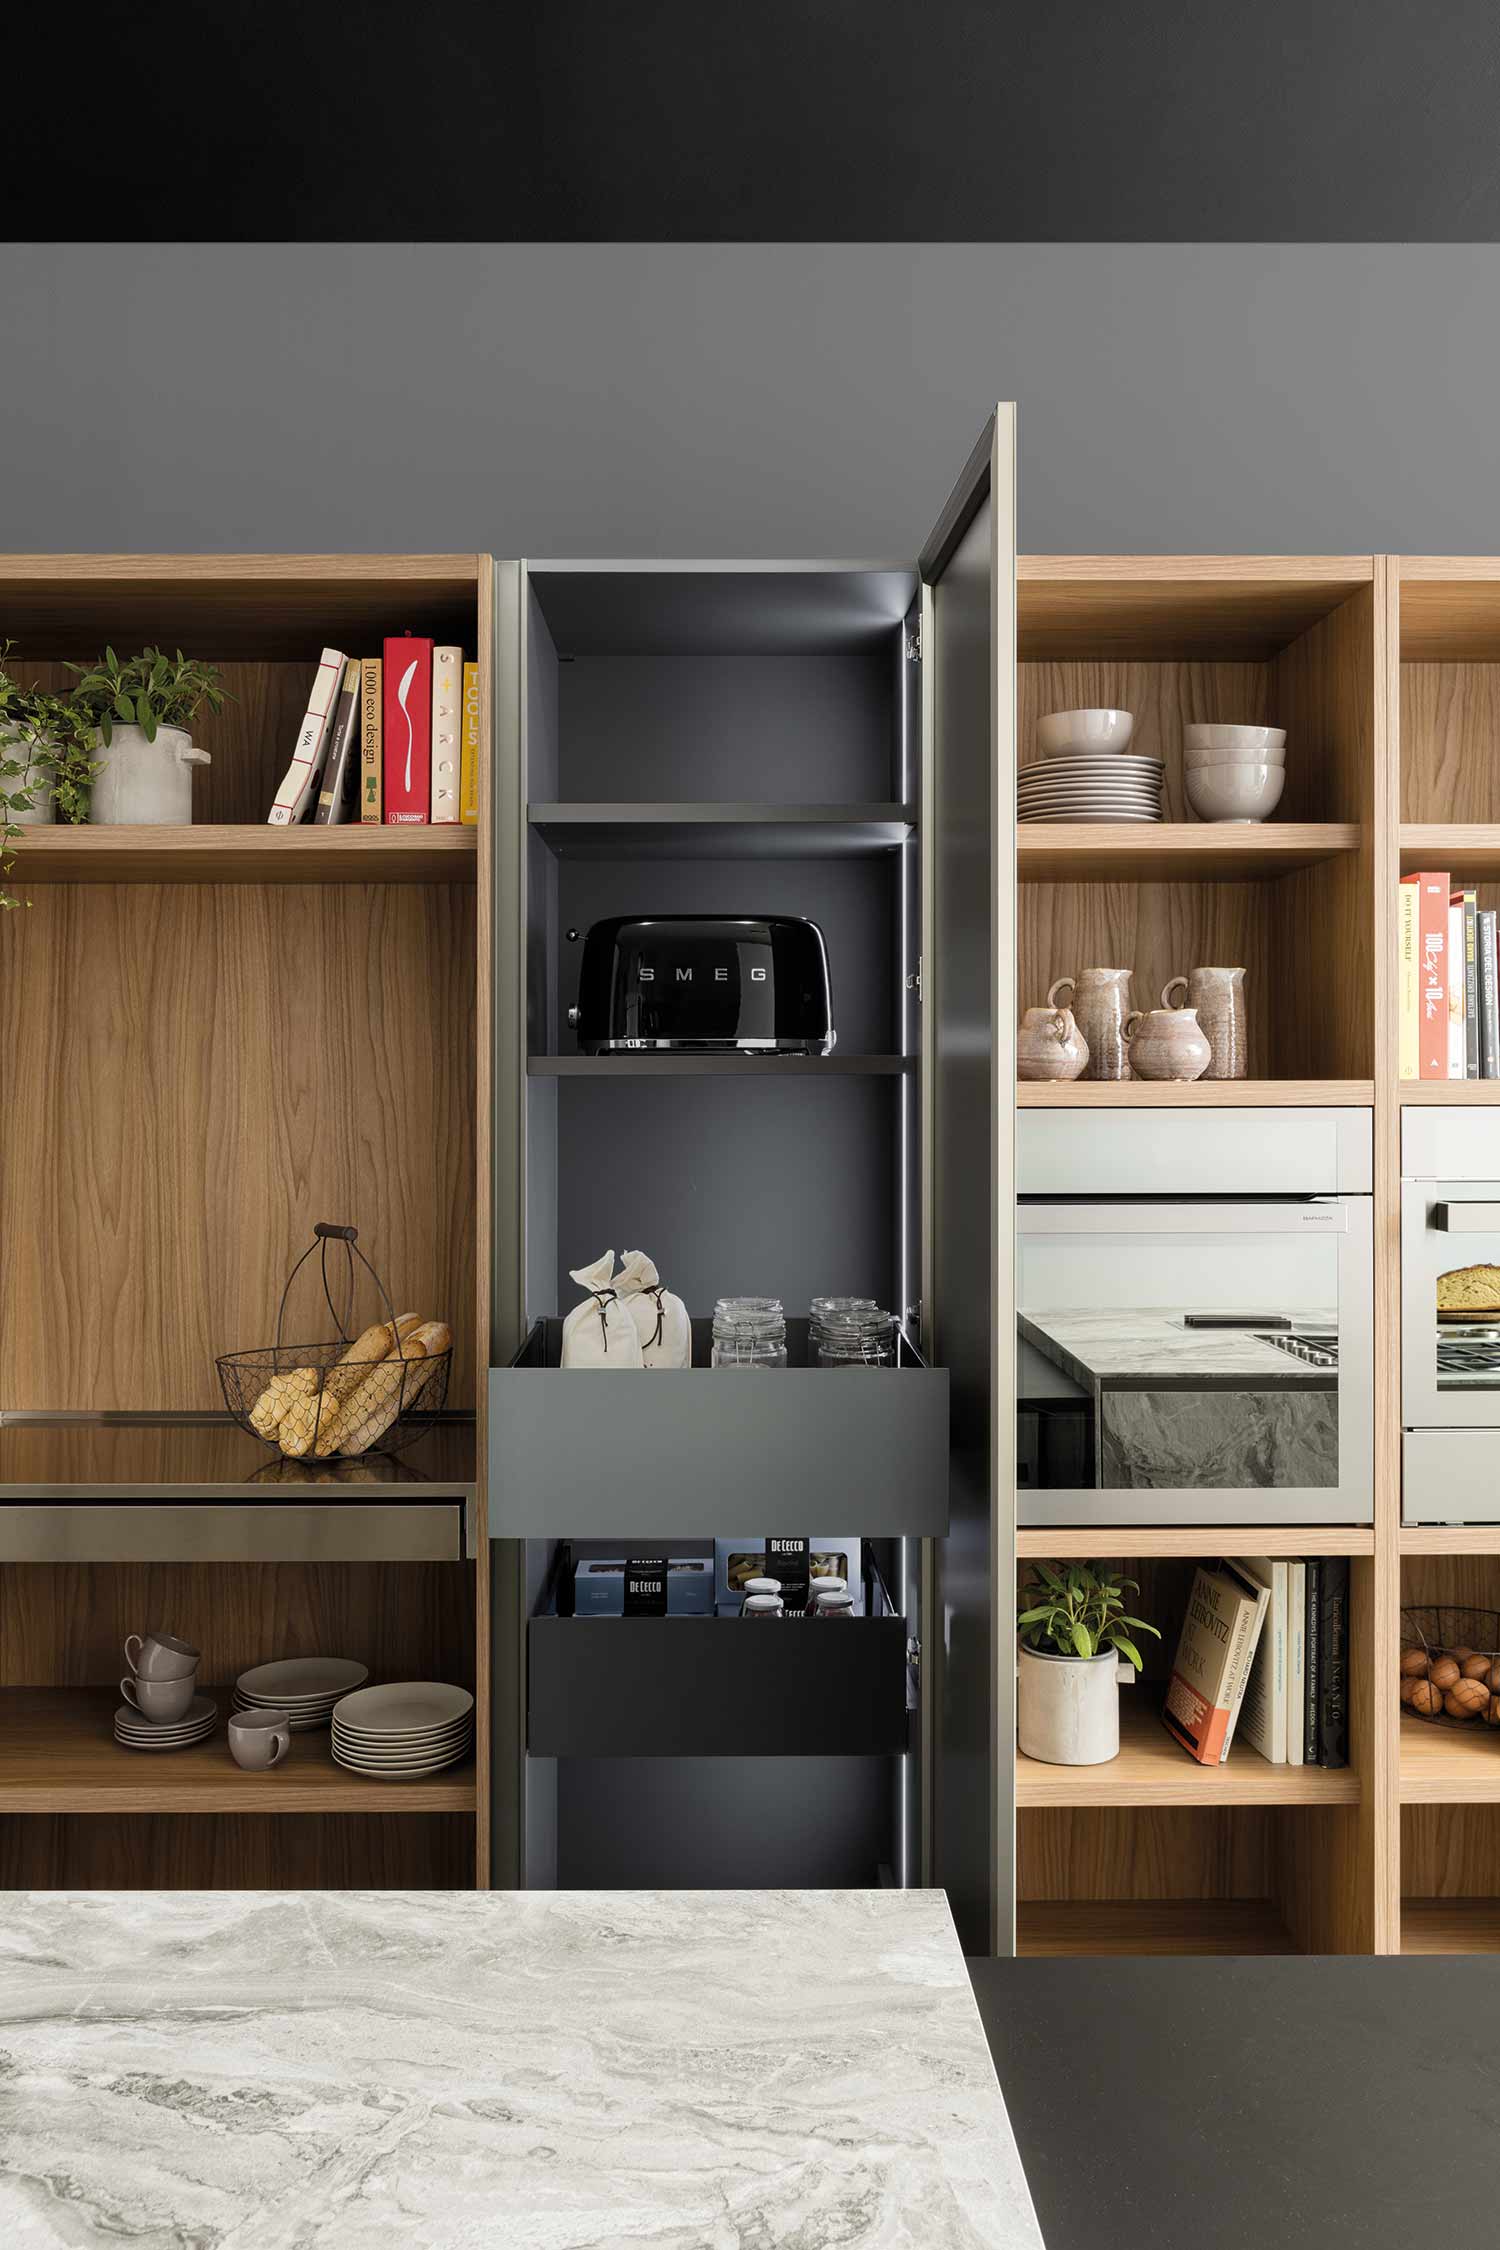 Large tall units equipped with full-extension deep-drawers for an easy organised pantry.